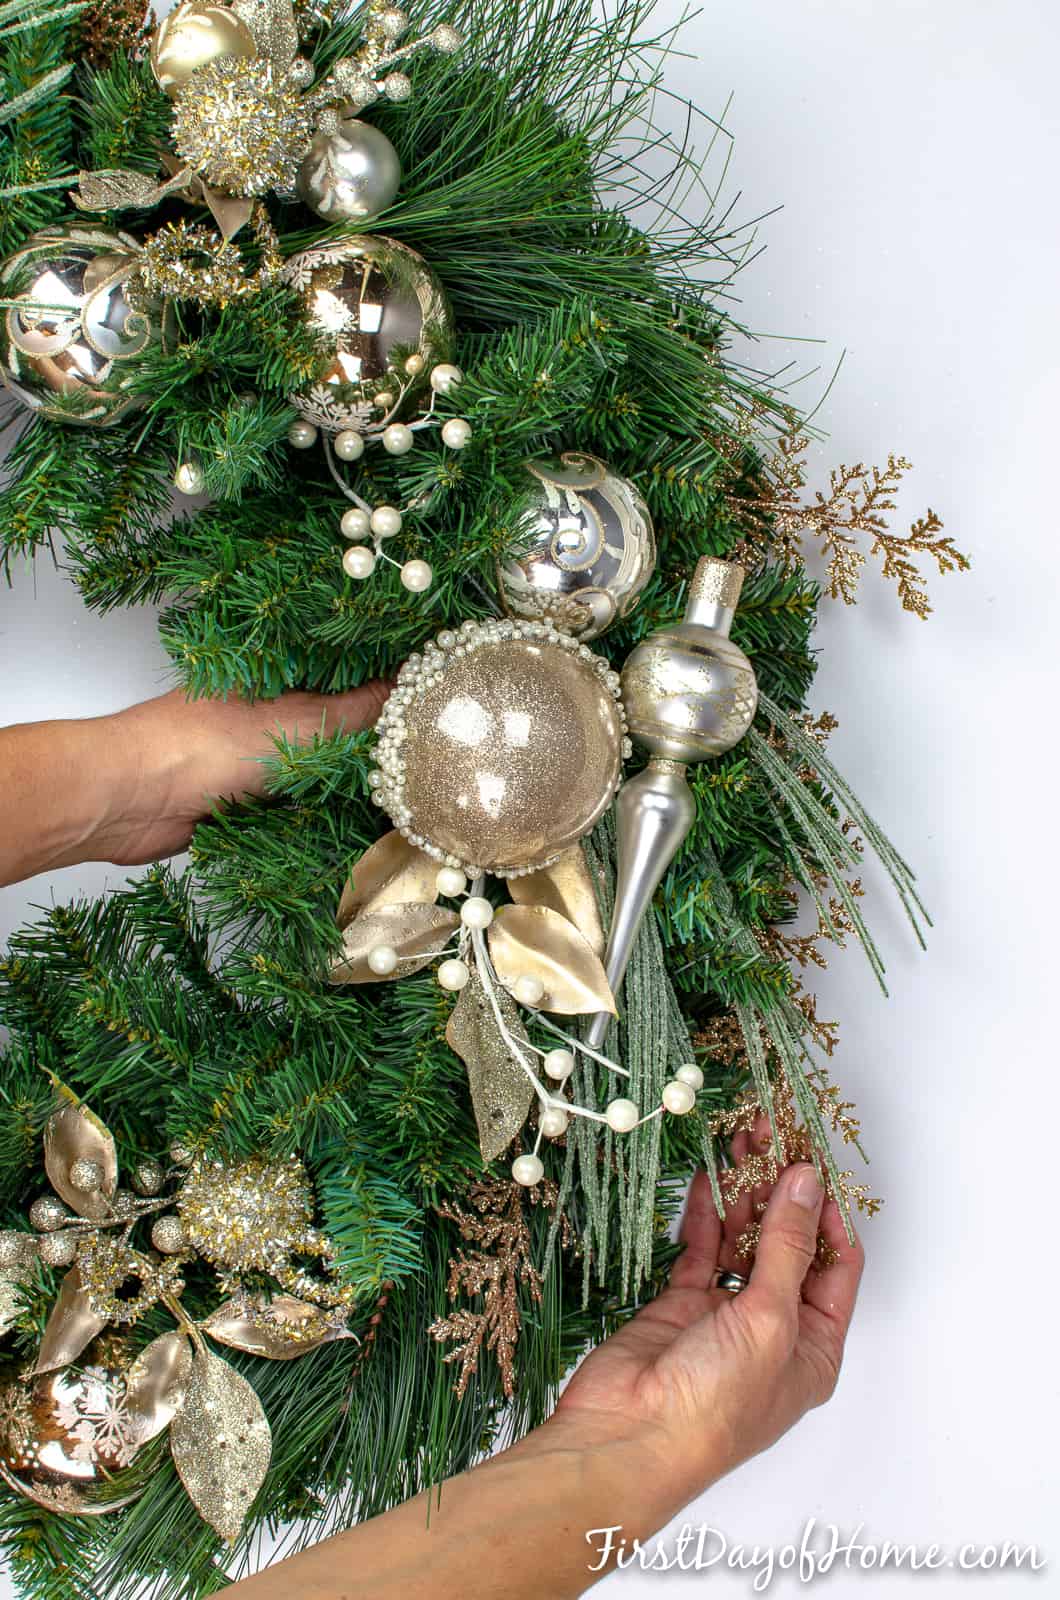 How to Make a Christmas Wreath from Scratch